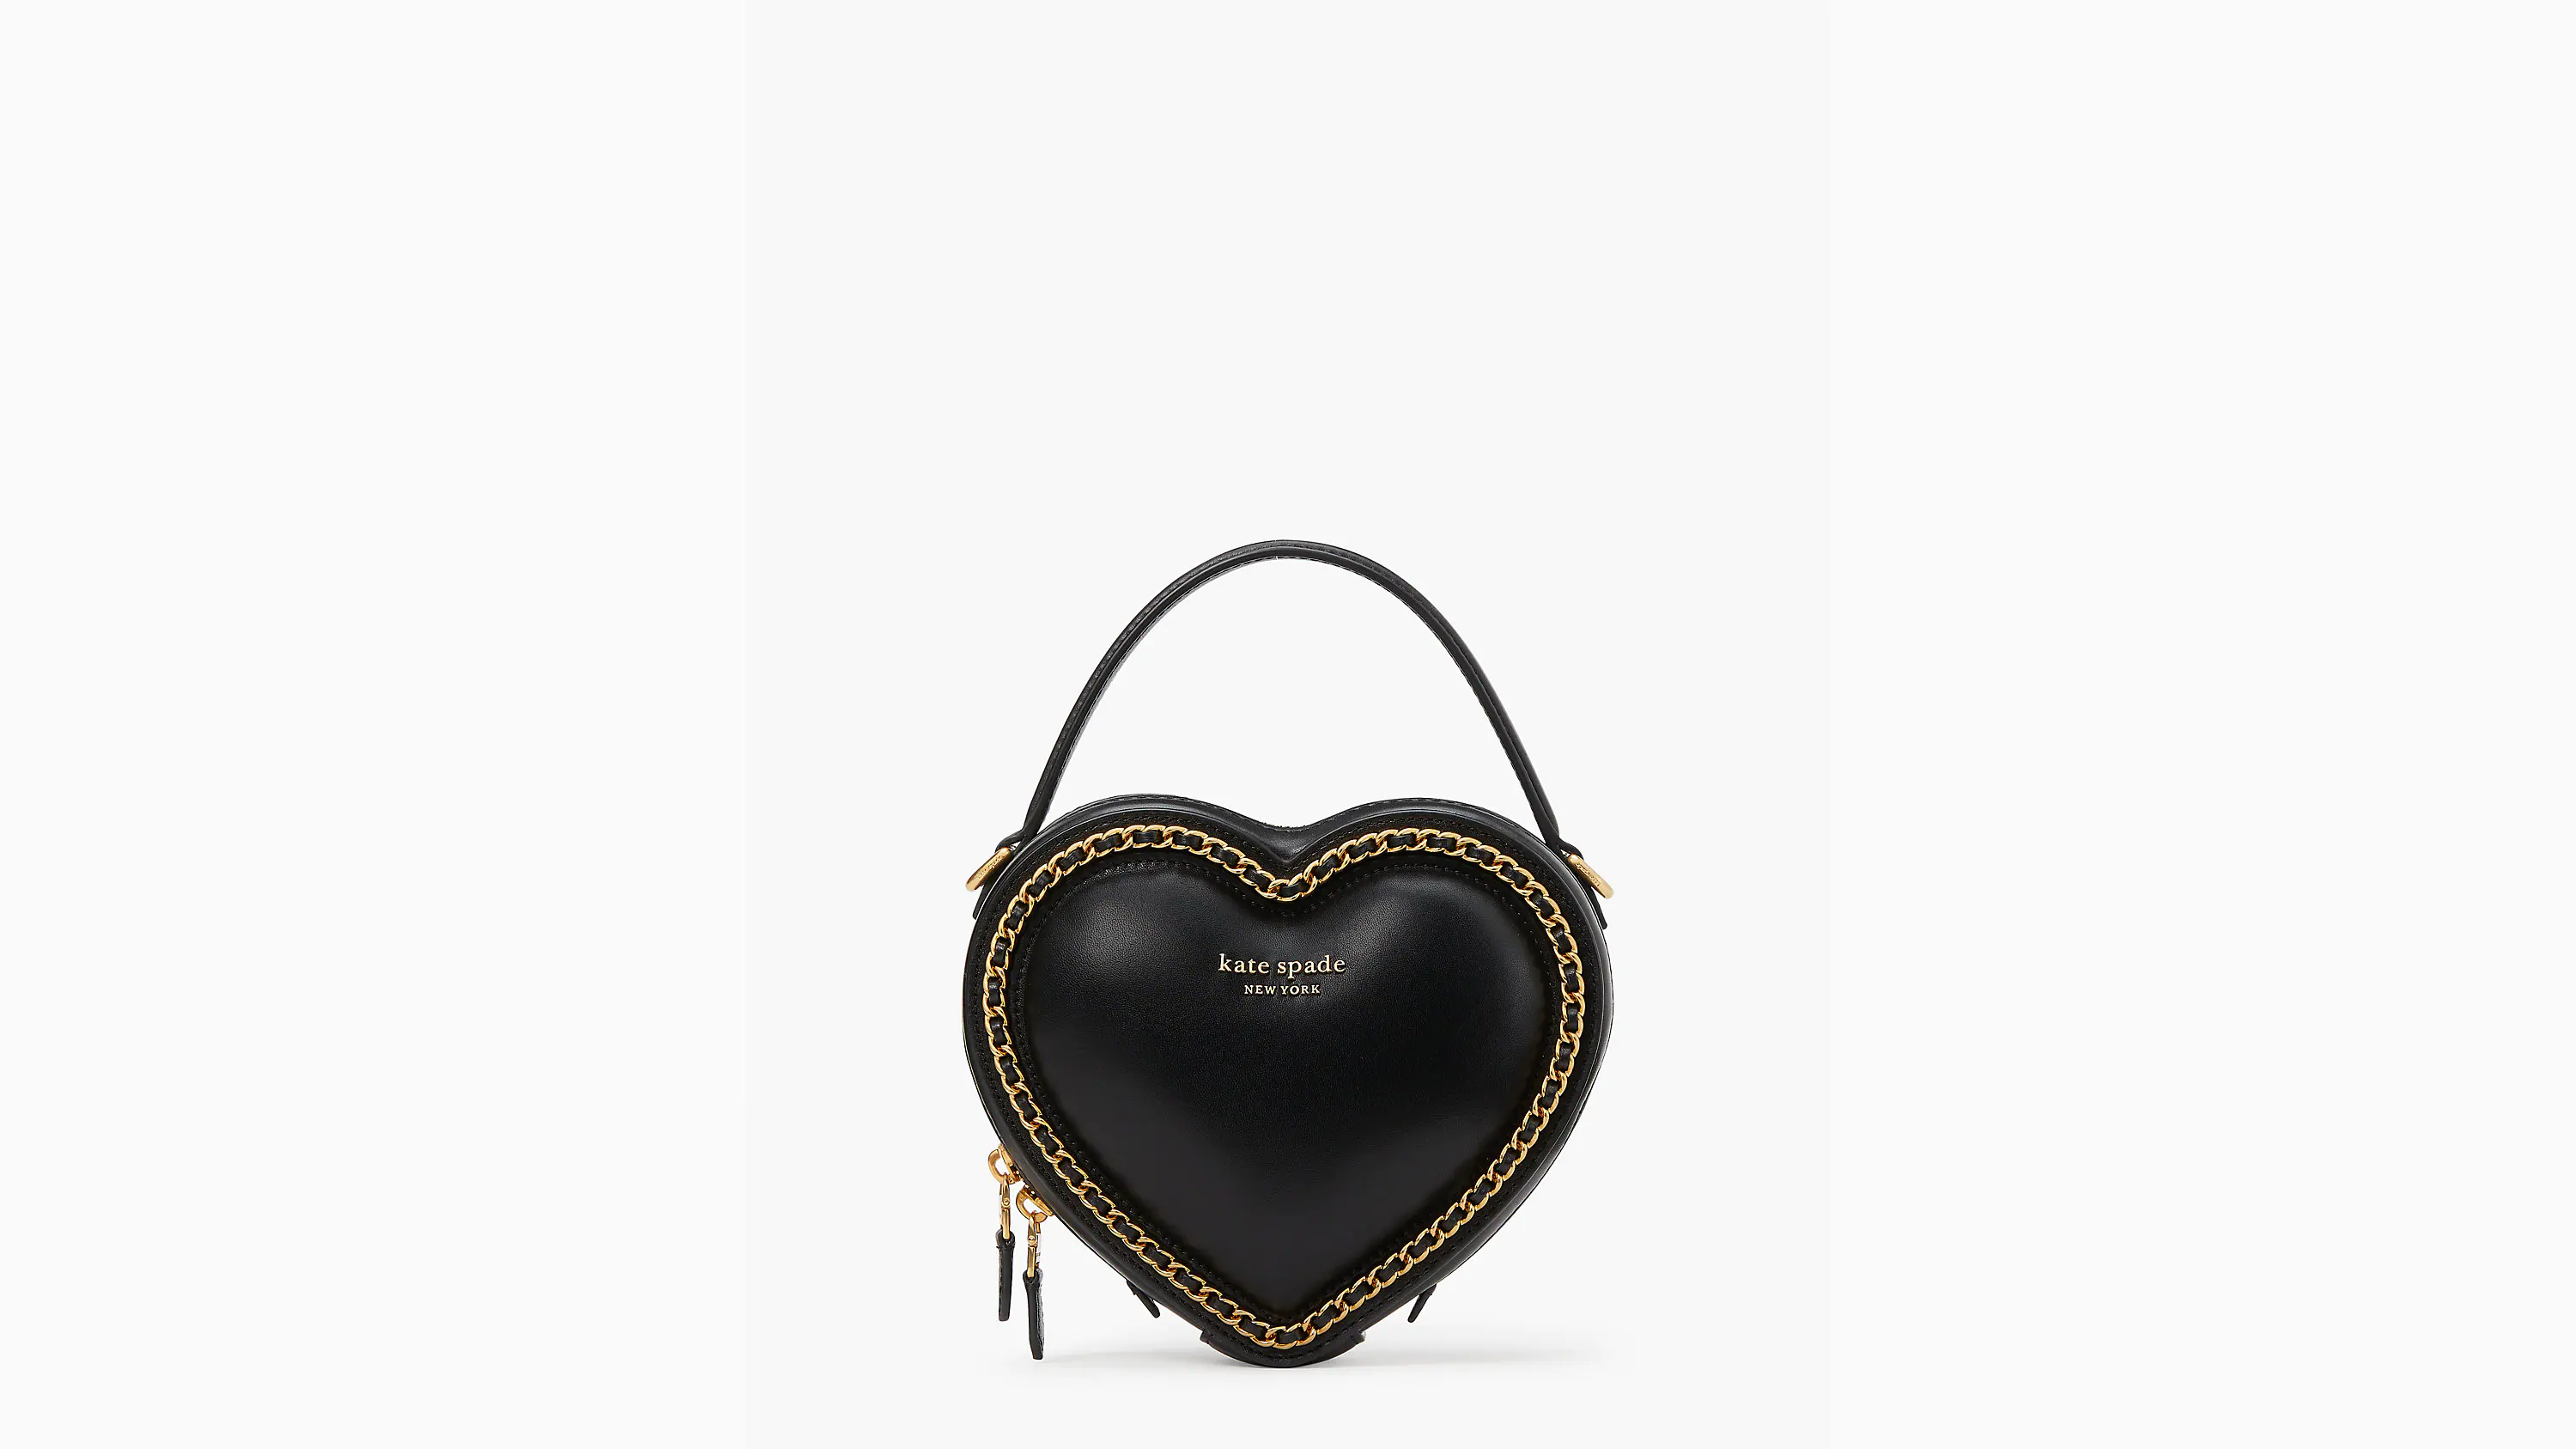 Valentine's Day Décor — Where to Find Heart-Shaped Items